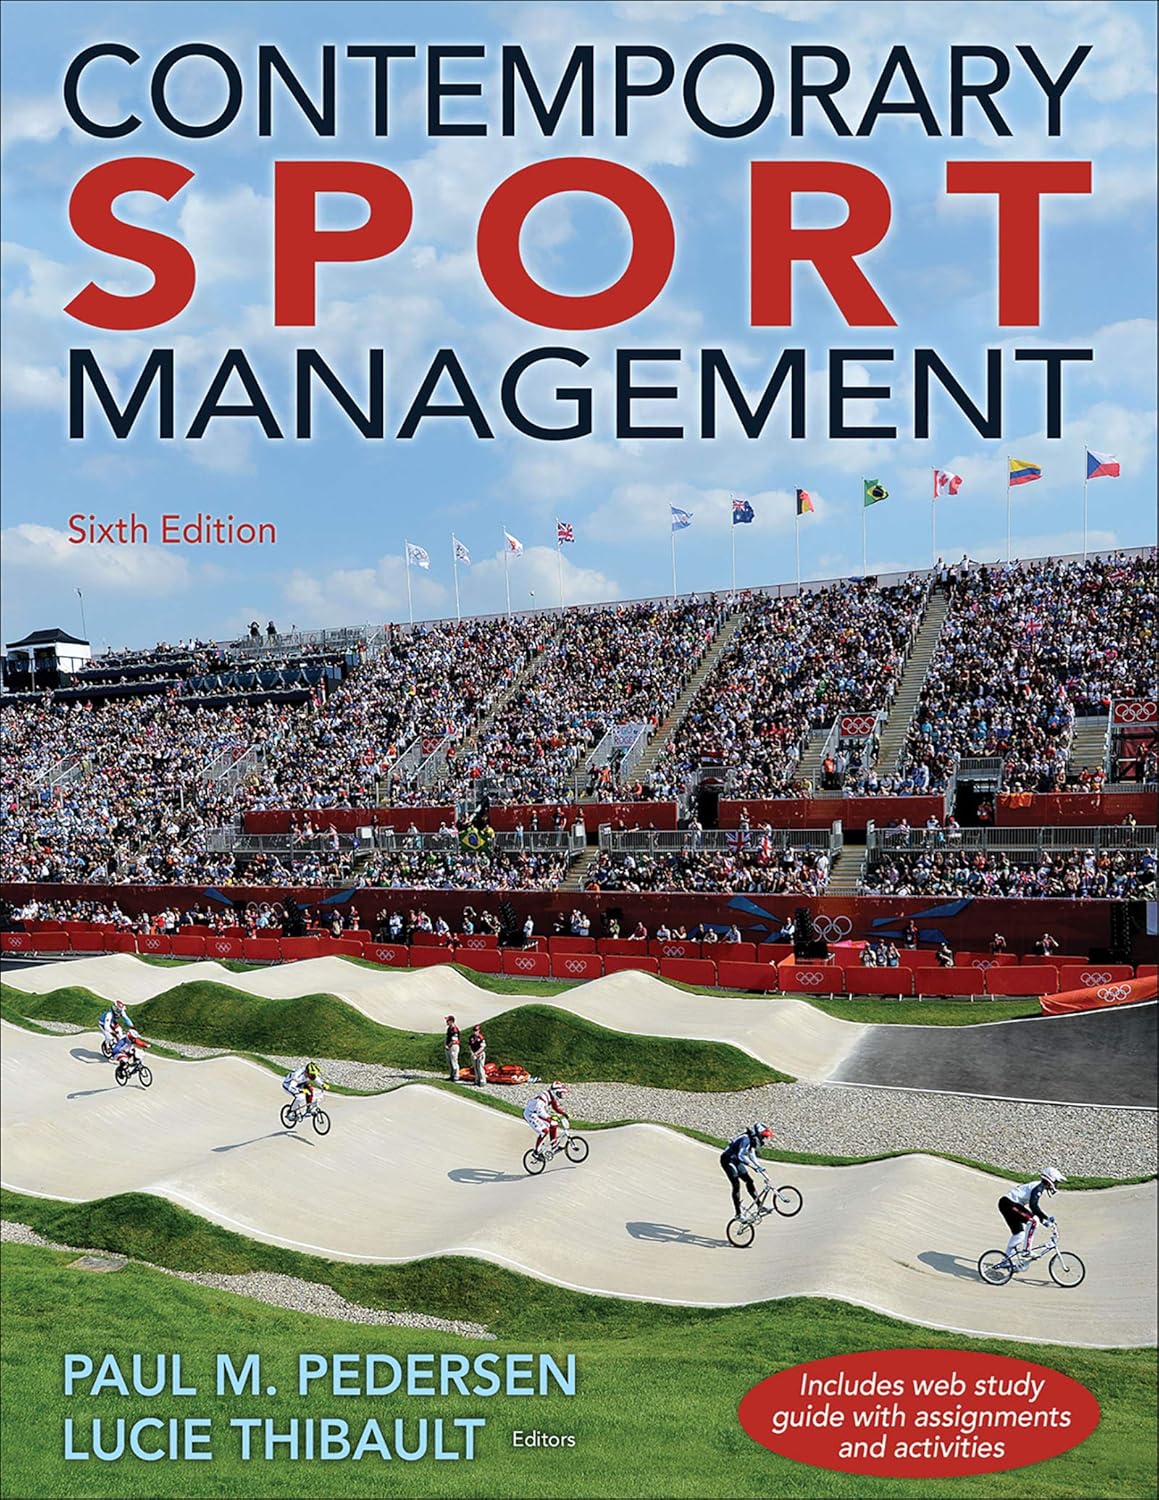 a cover image for the test bank to accompany Pedersen's Contemporary Sport Management book